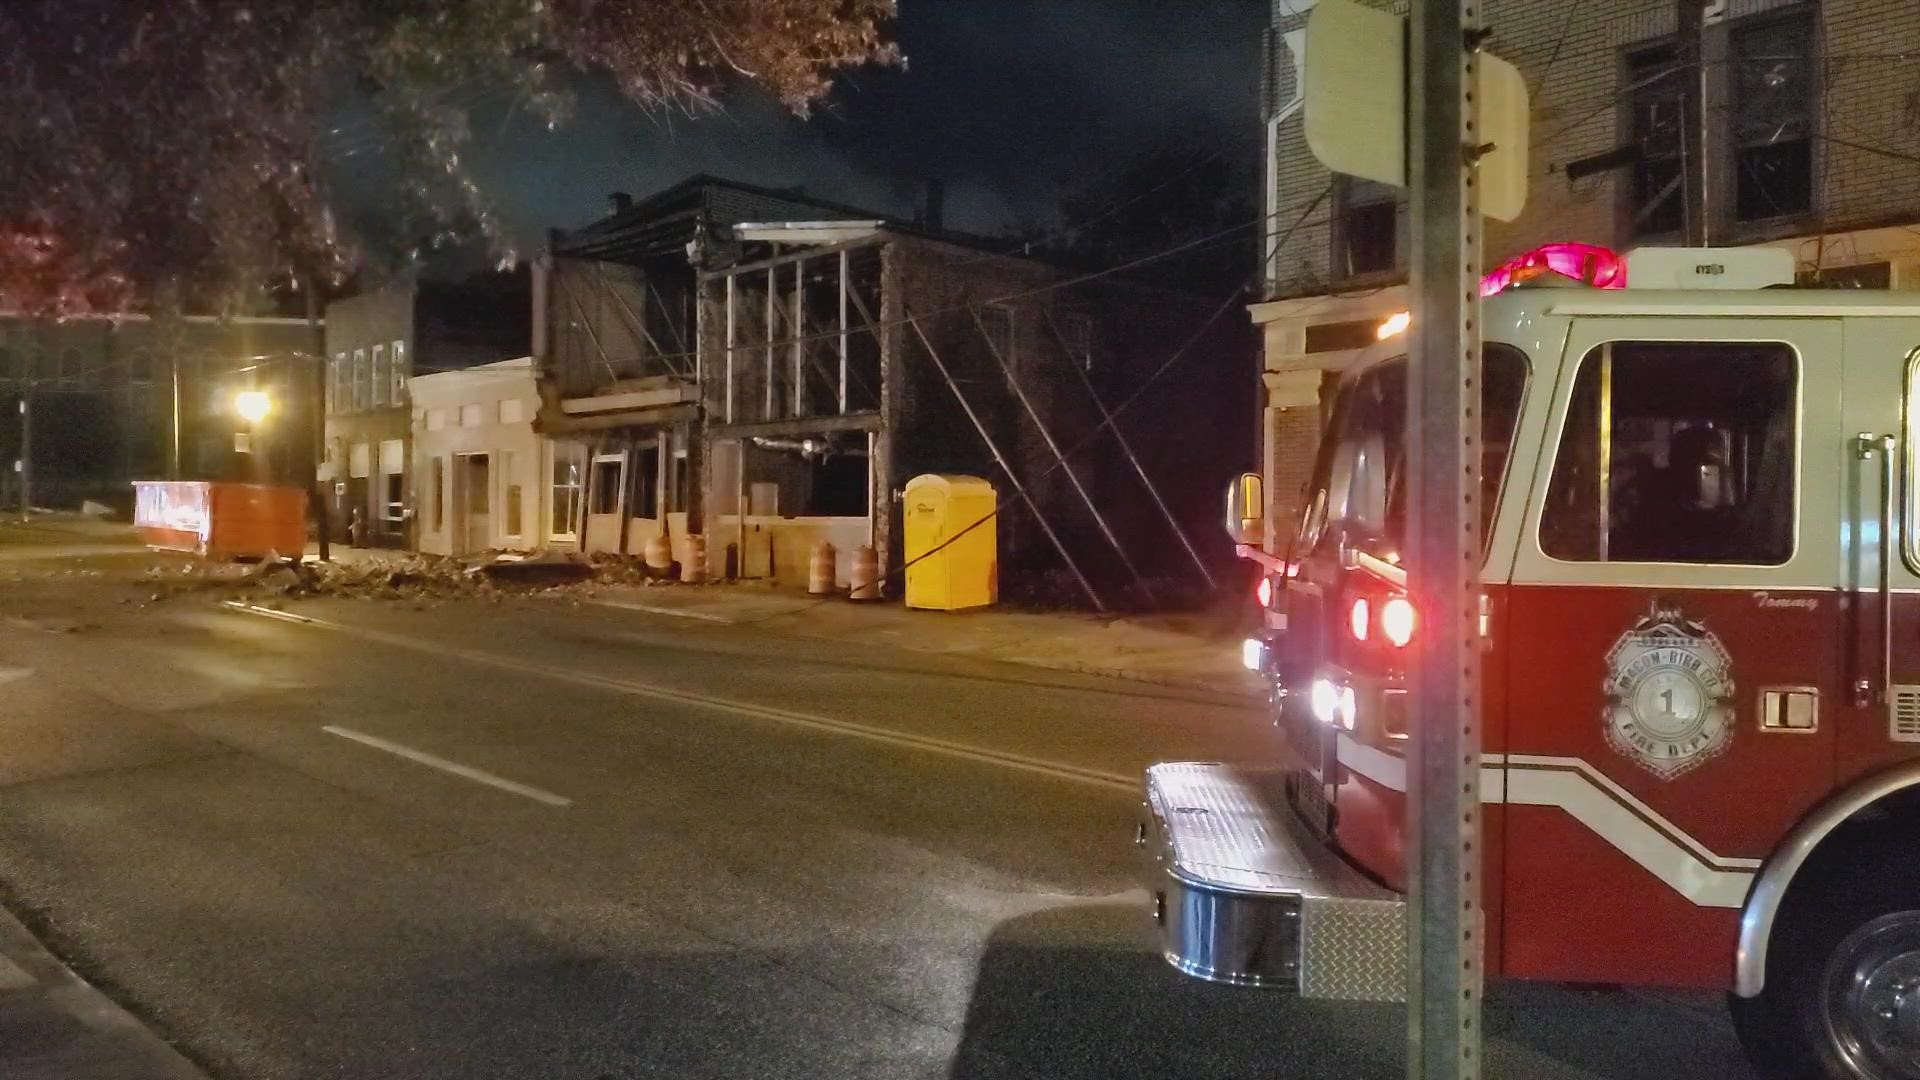 Bibb firefighters say a vacant building was damaged on Forsyth Road near H&H restaurant.